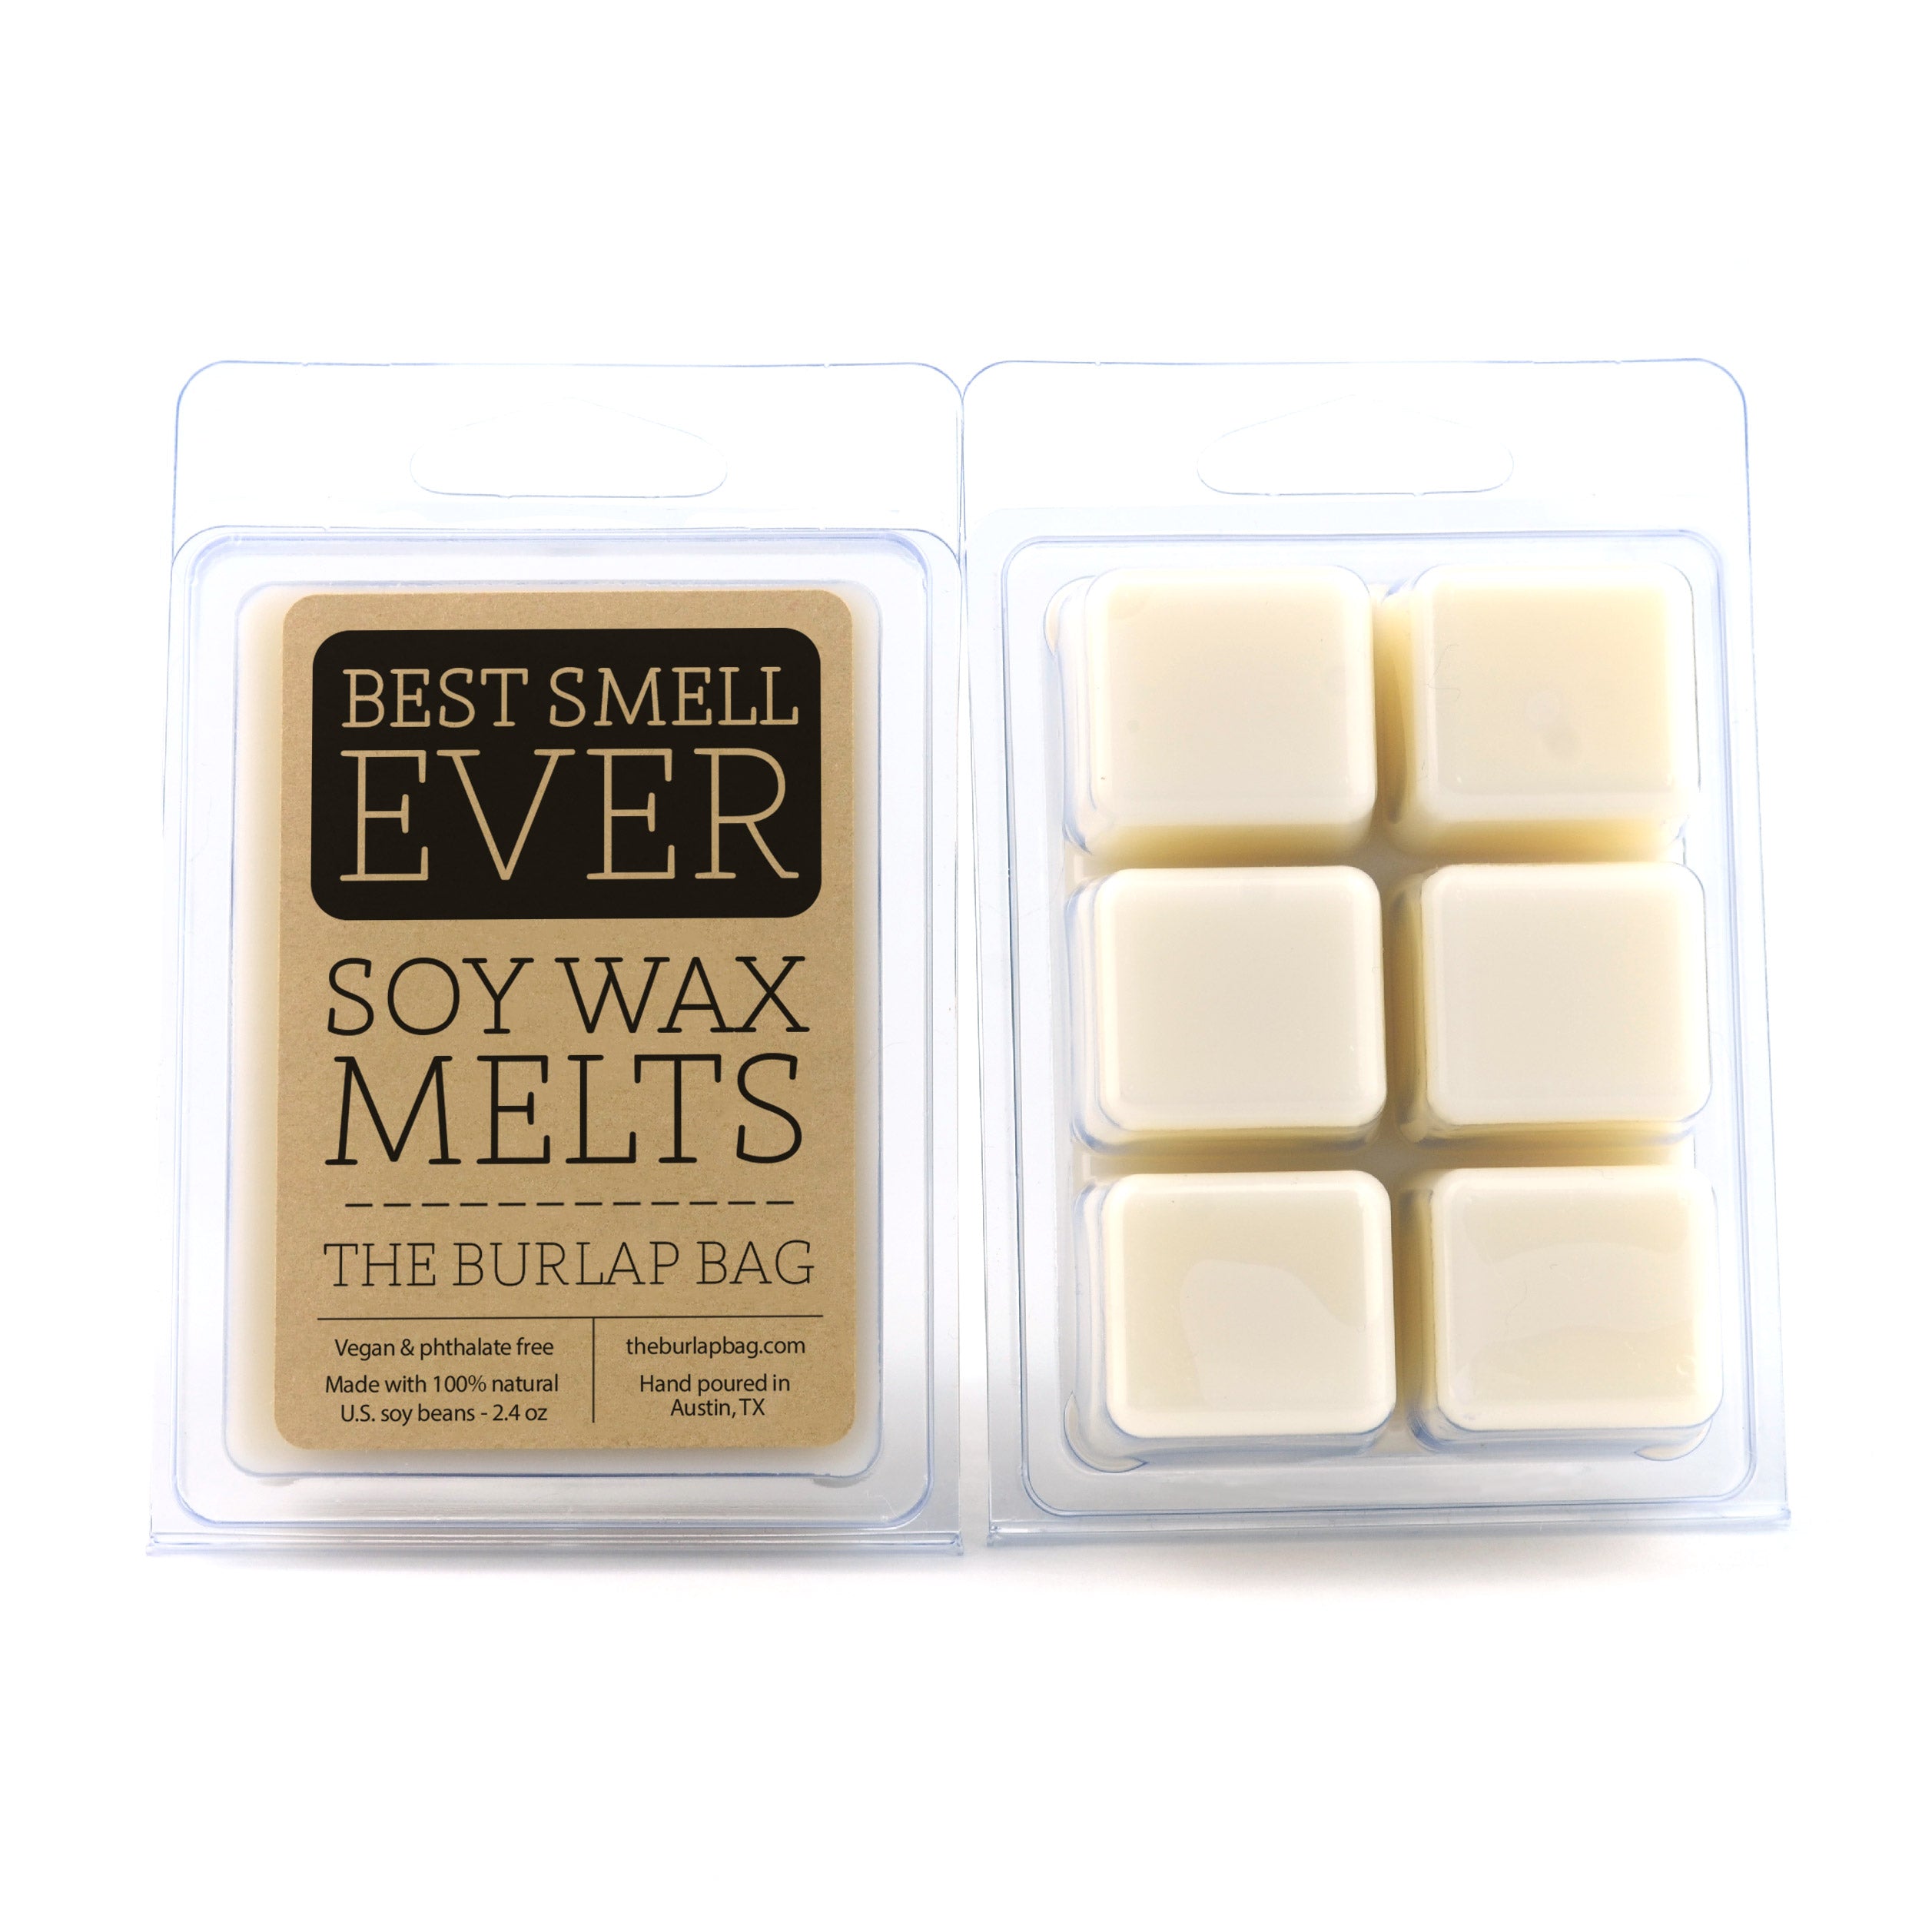 ✨GEL WAX MELTS✨ It's never been so easy to change scents. Simply